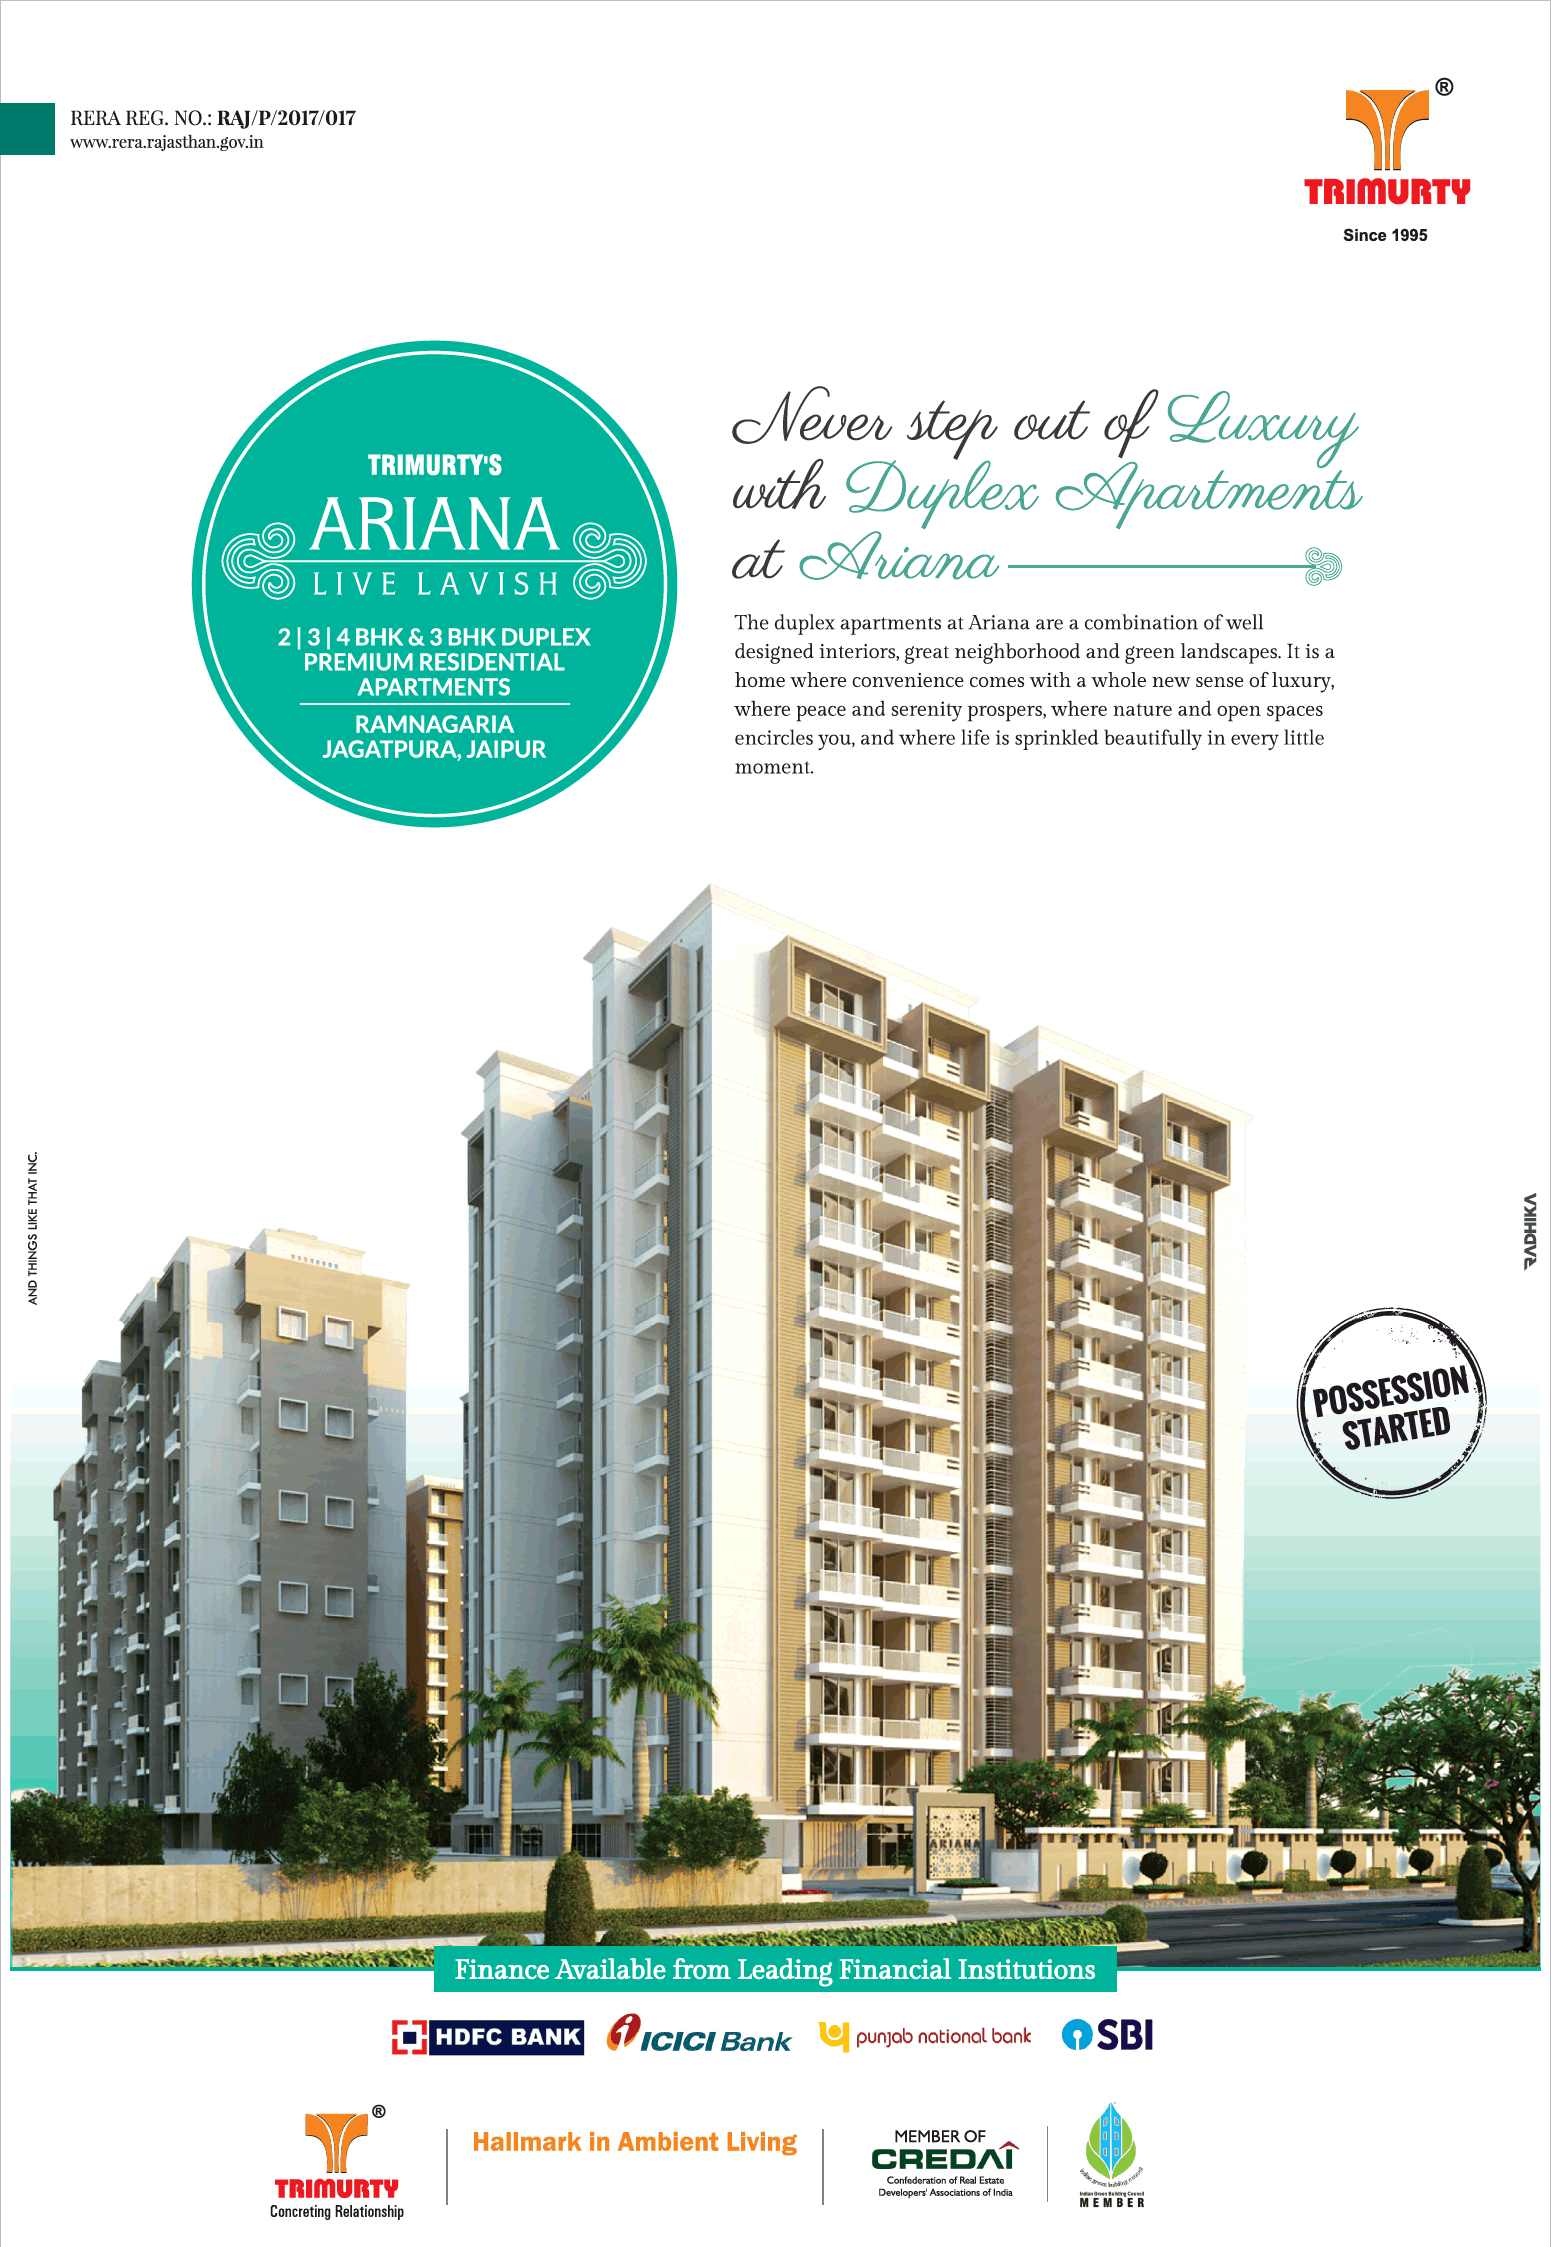 Never step out of luxury with duplex apartments at Trimurty Ariana in Jaipur